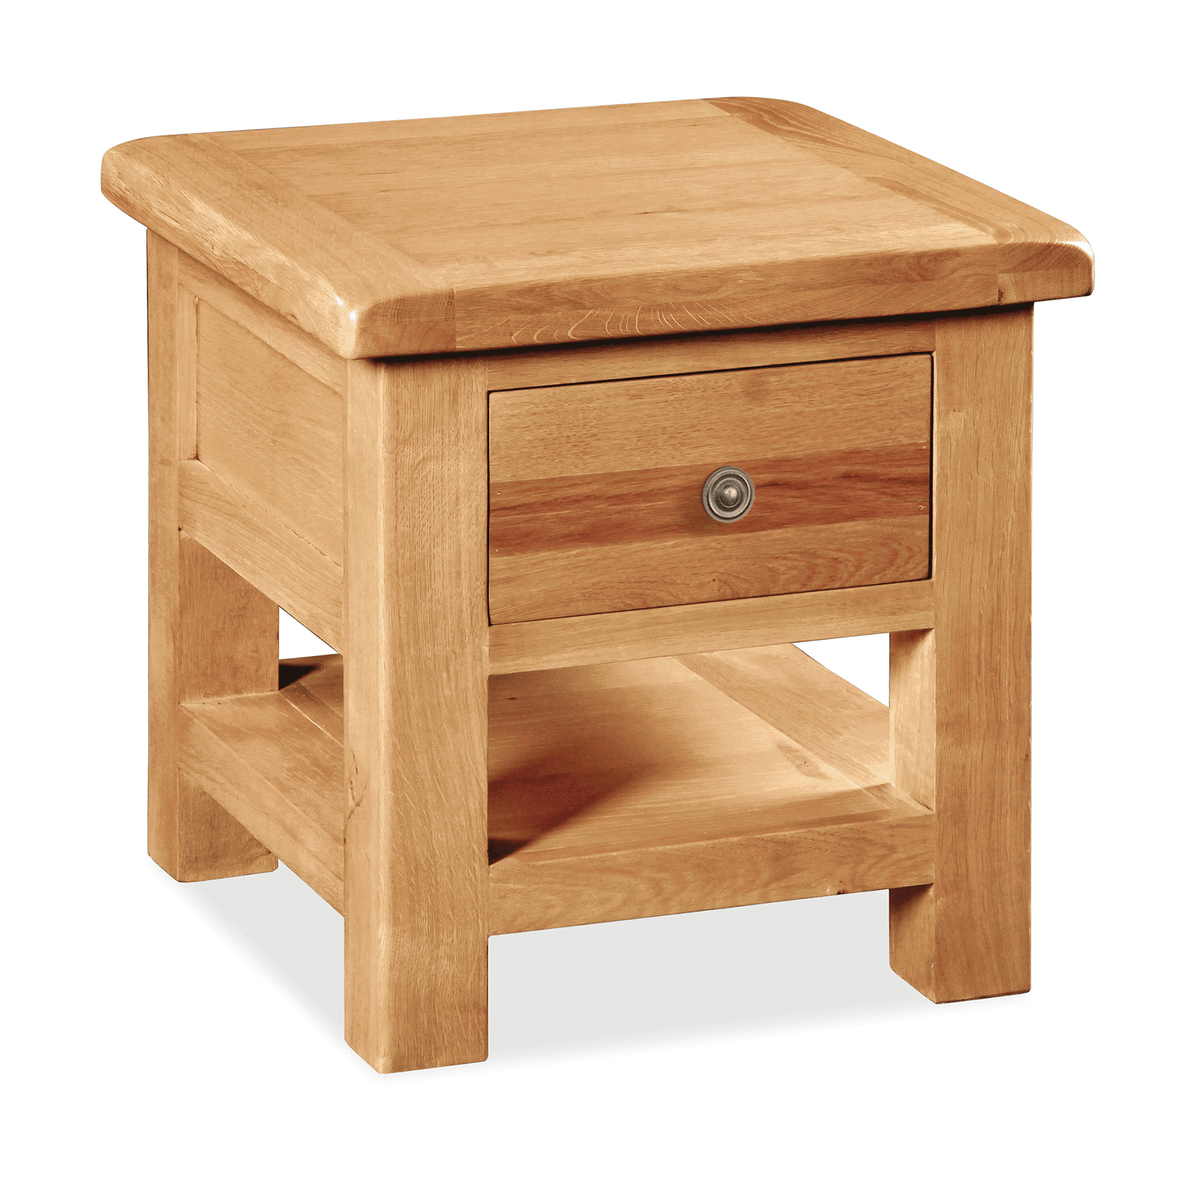 Sidmouth Lamp Table With Drawer by Roseland Furniture